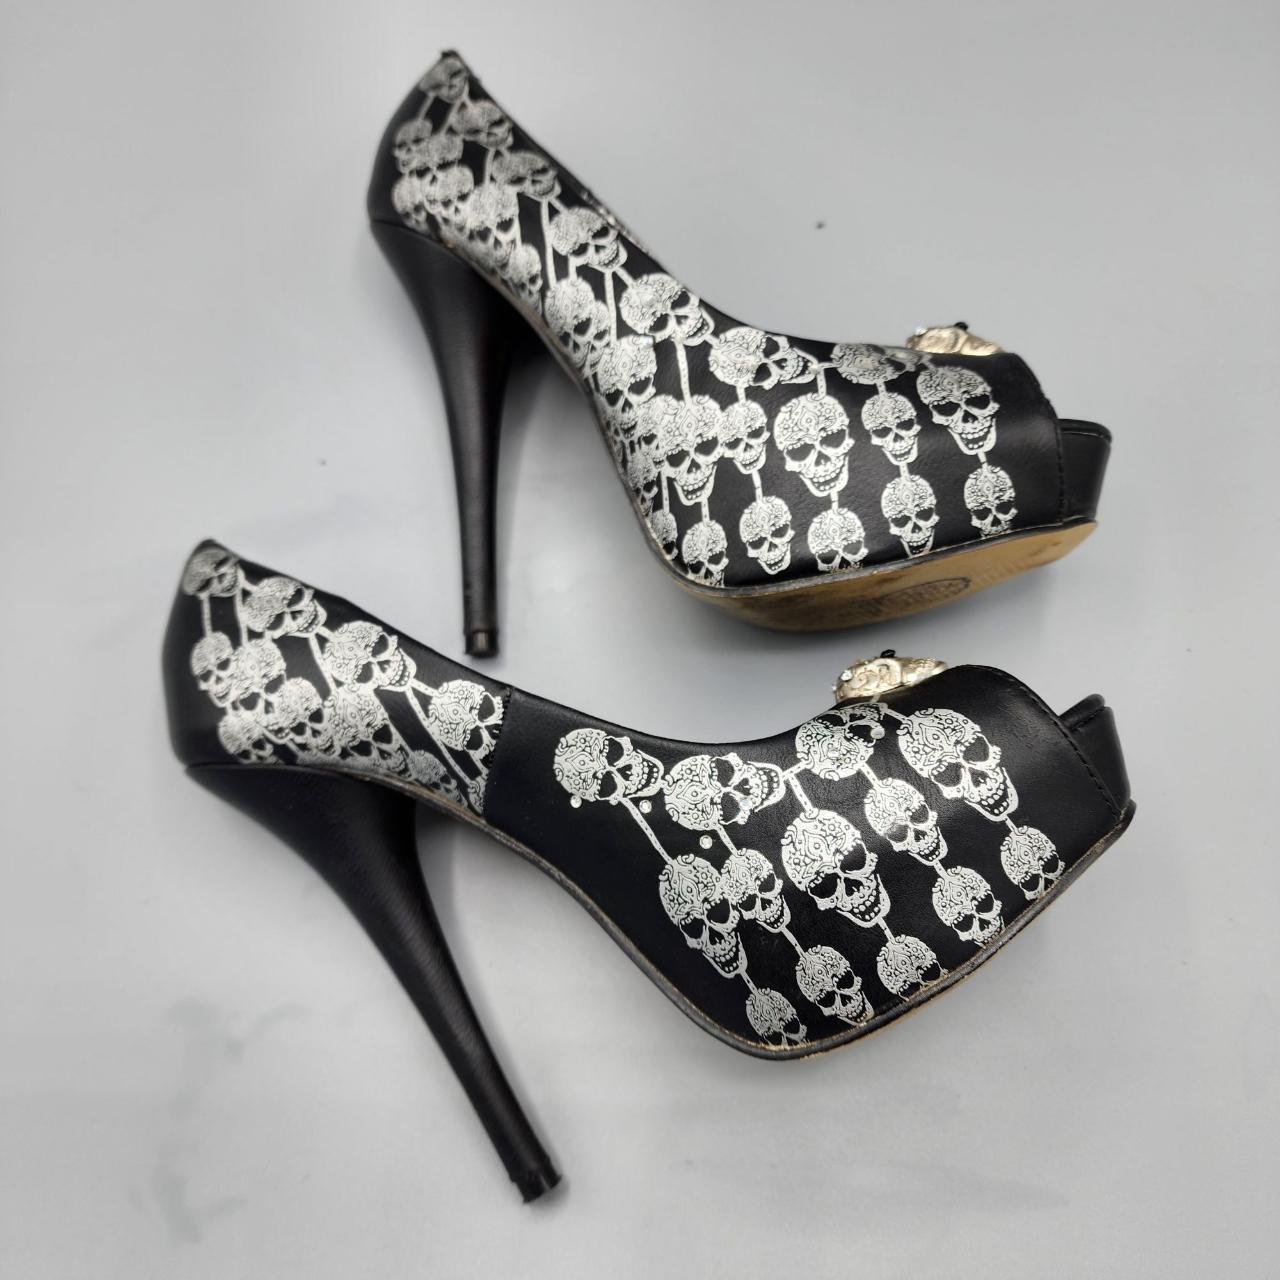 Iron Fist Women's Black and Silver Courts (2)